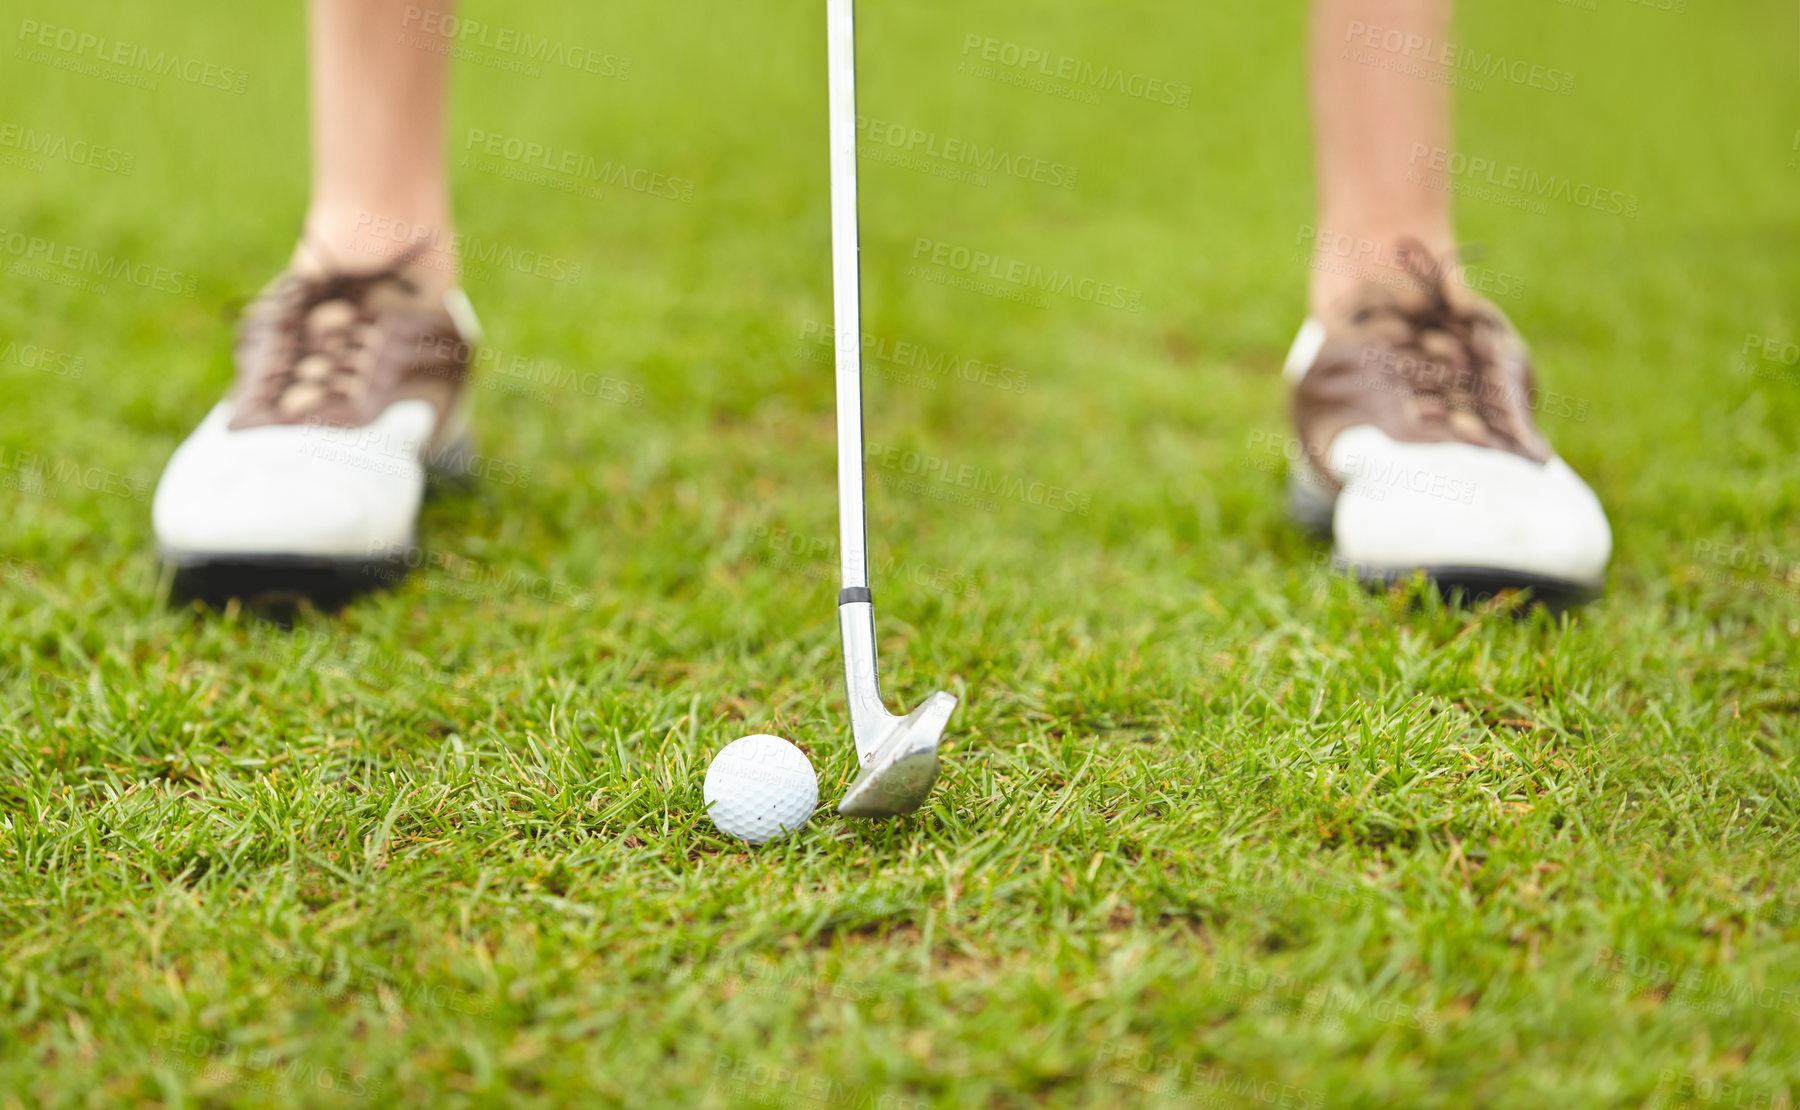 Buy stock photo Cropped shot of an unrecognizable woman out playing golf on a golf course